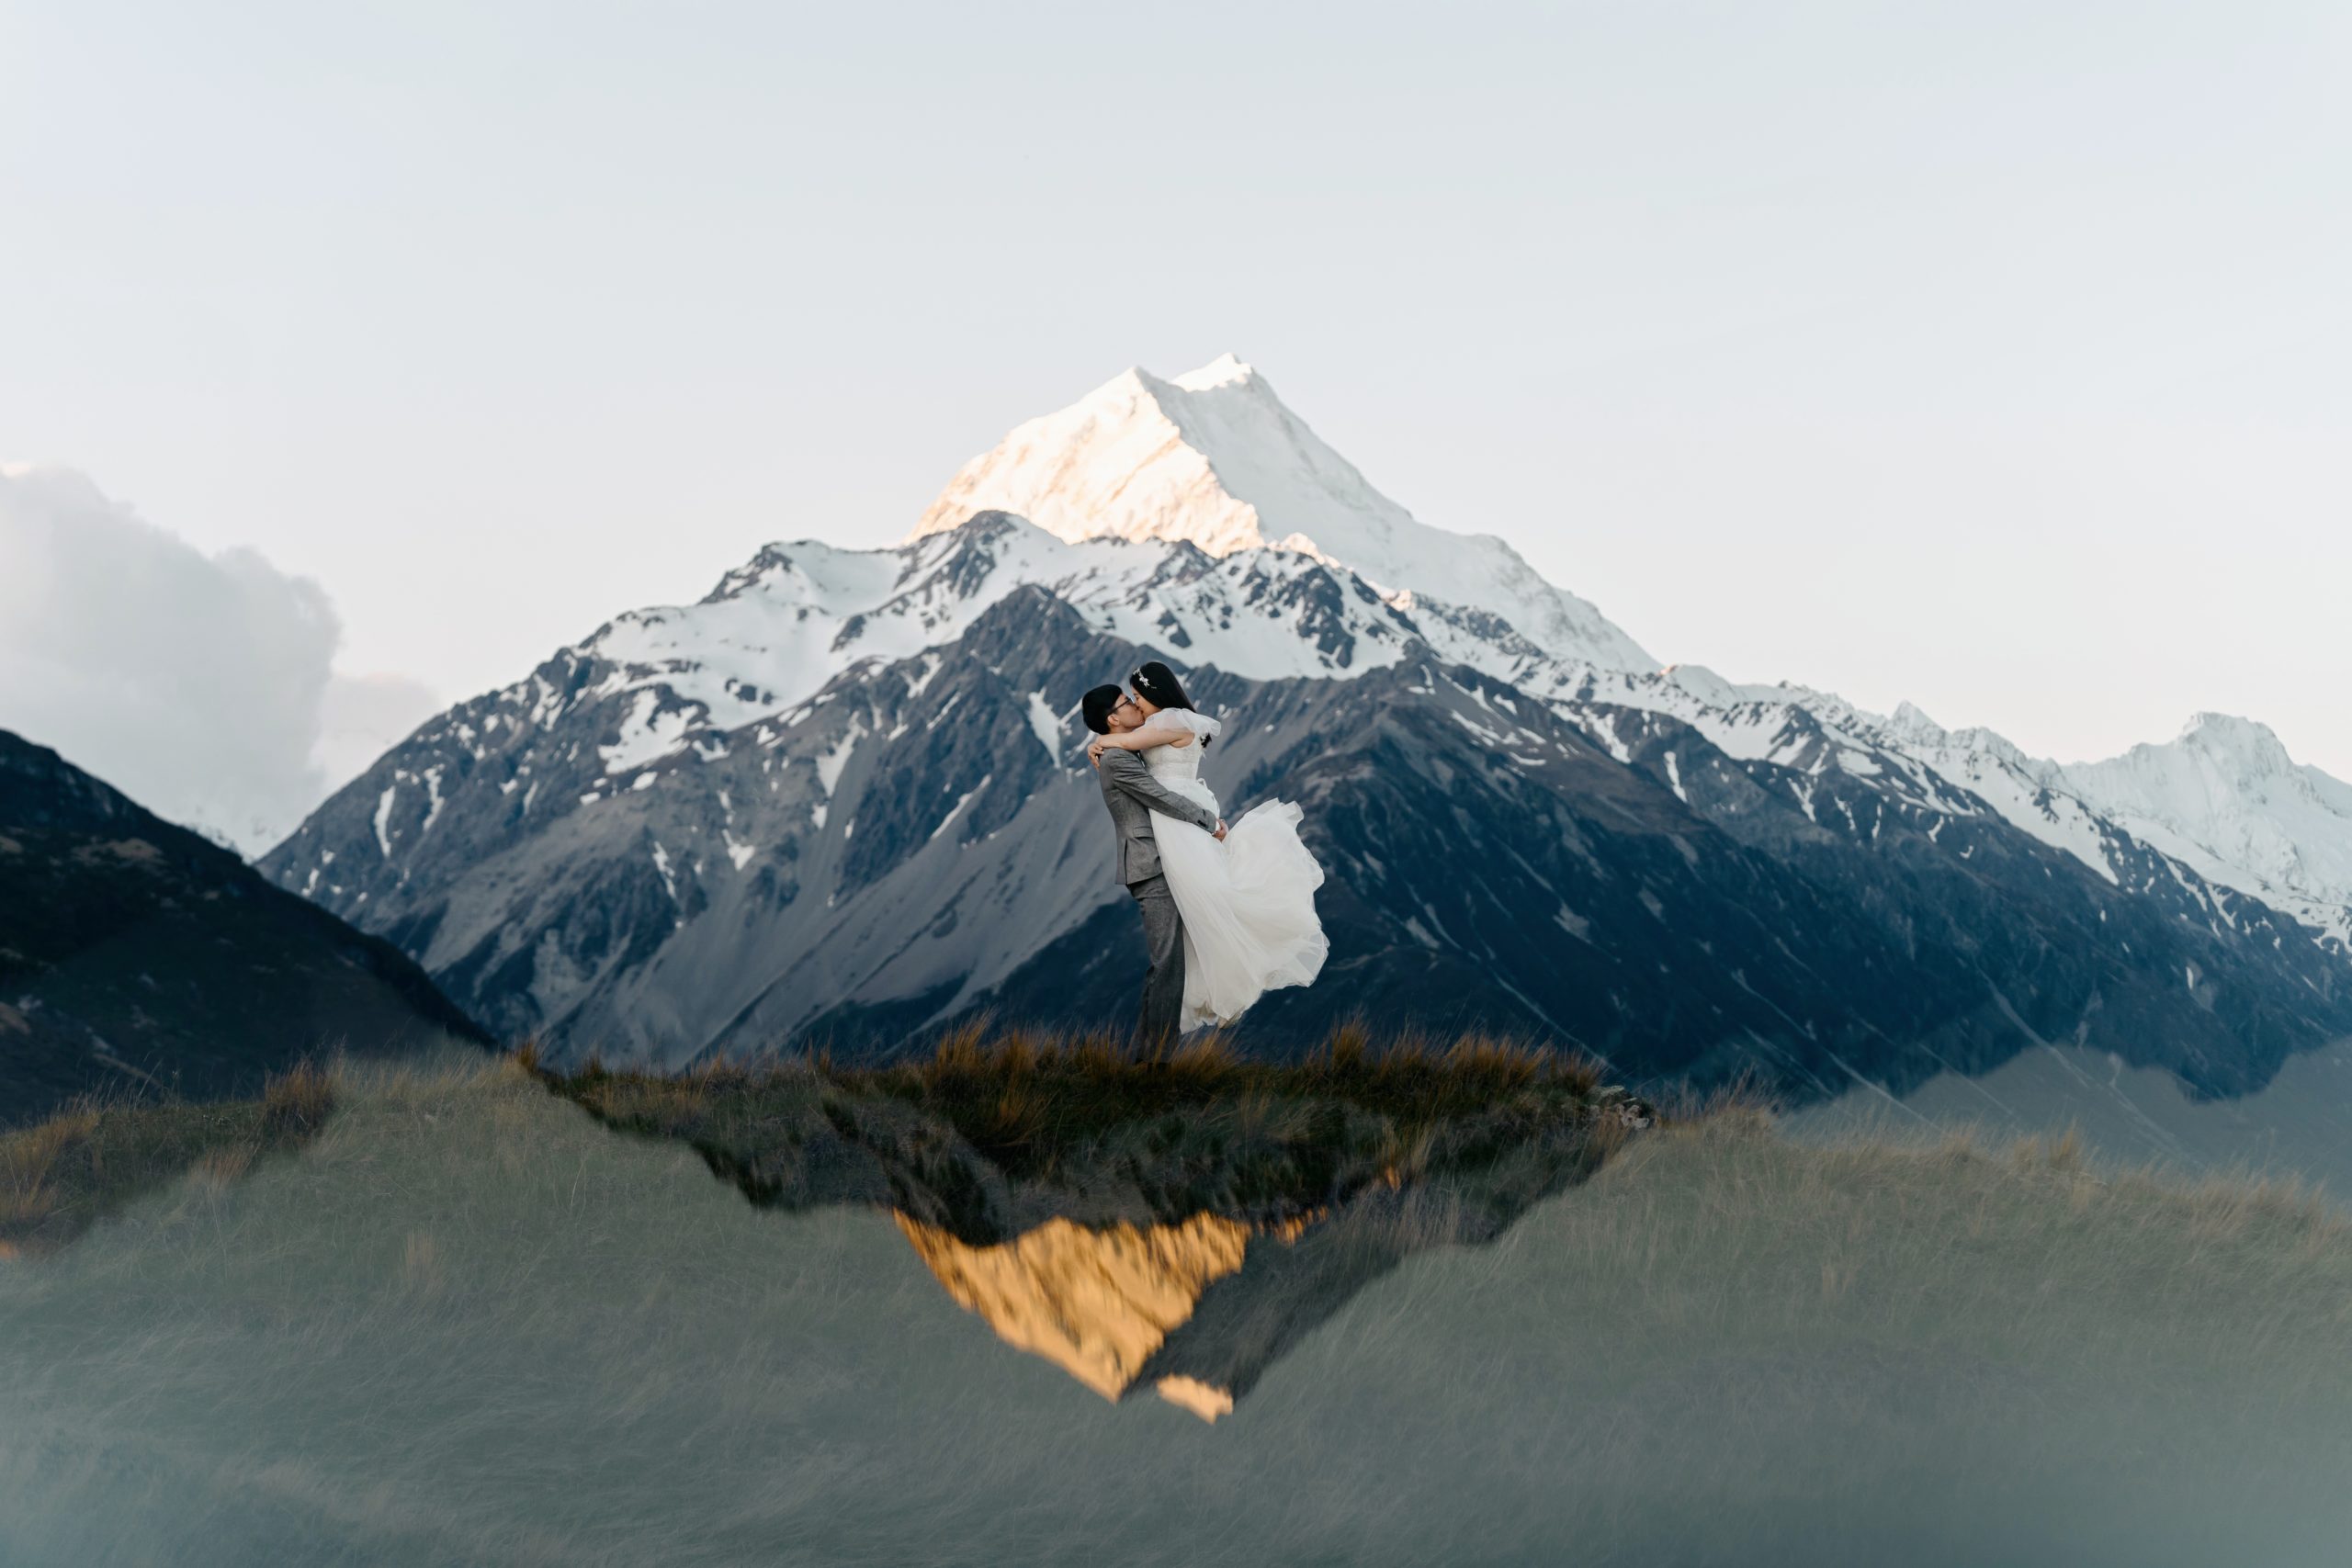 Mount Cook at sunset with the couple in the foreground